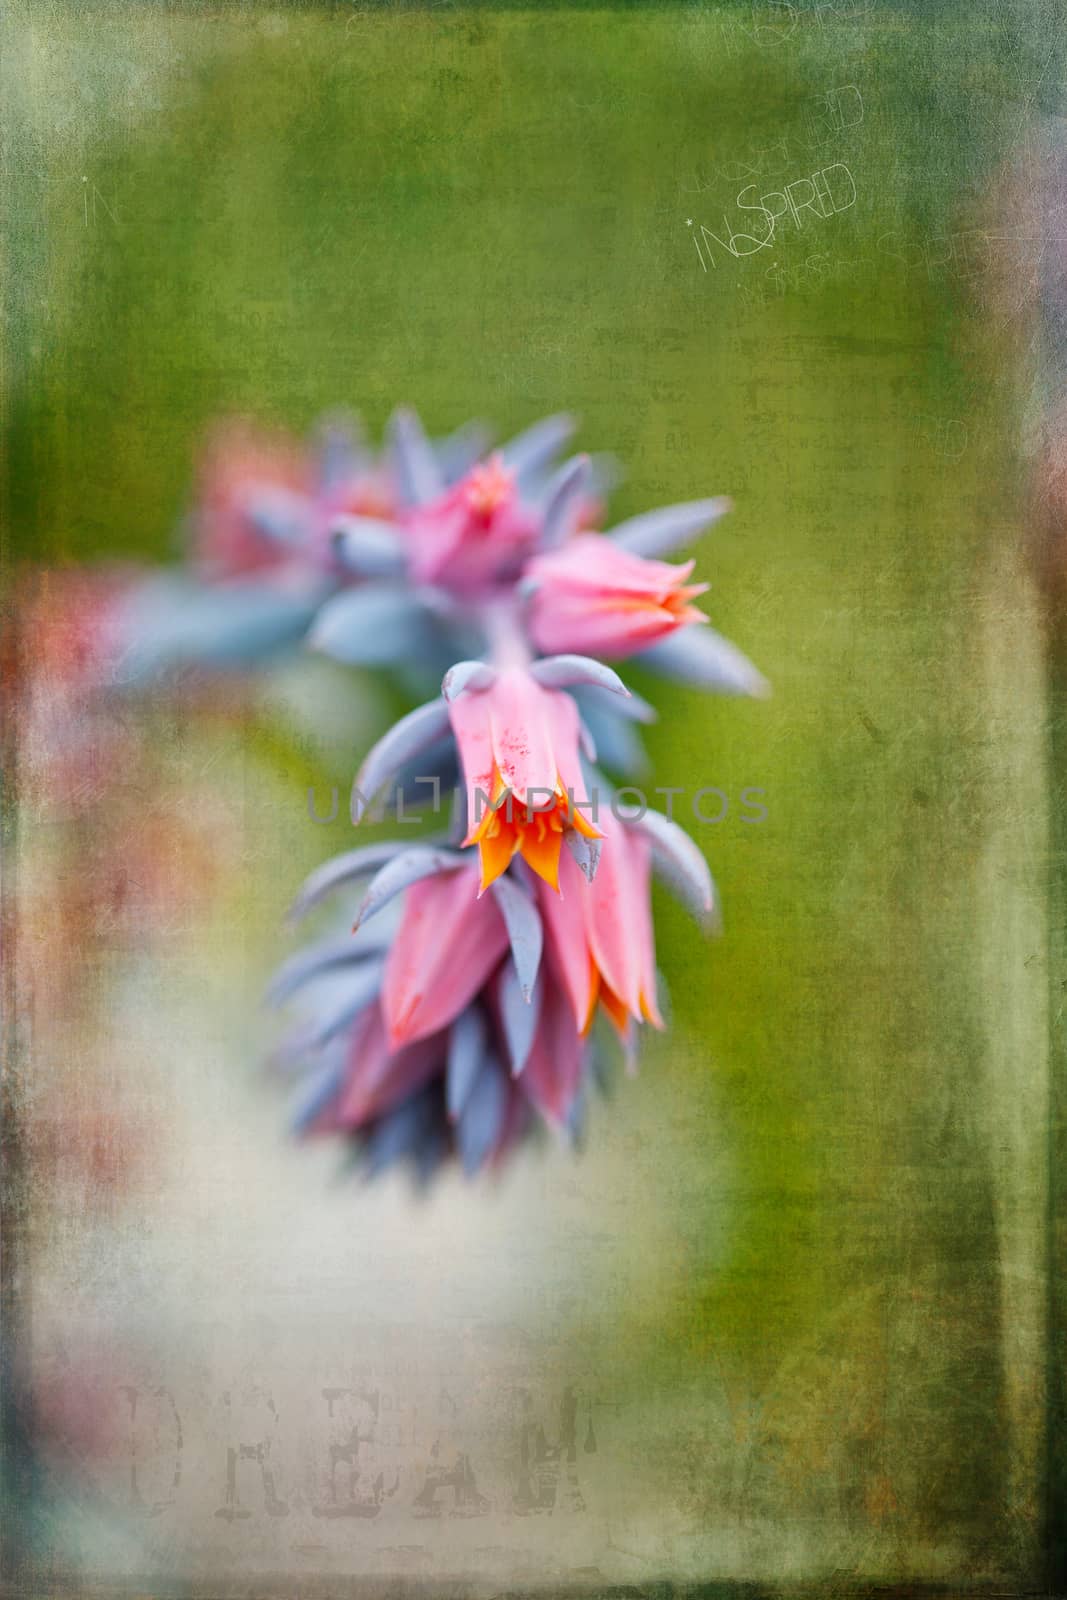 Dreamy image of a blue, pink, and yellow cactus blossom. Artistically textured.